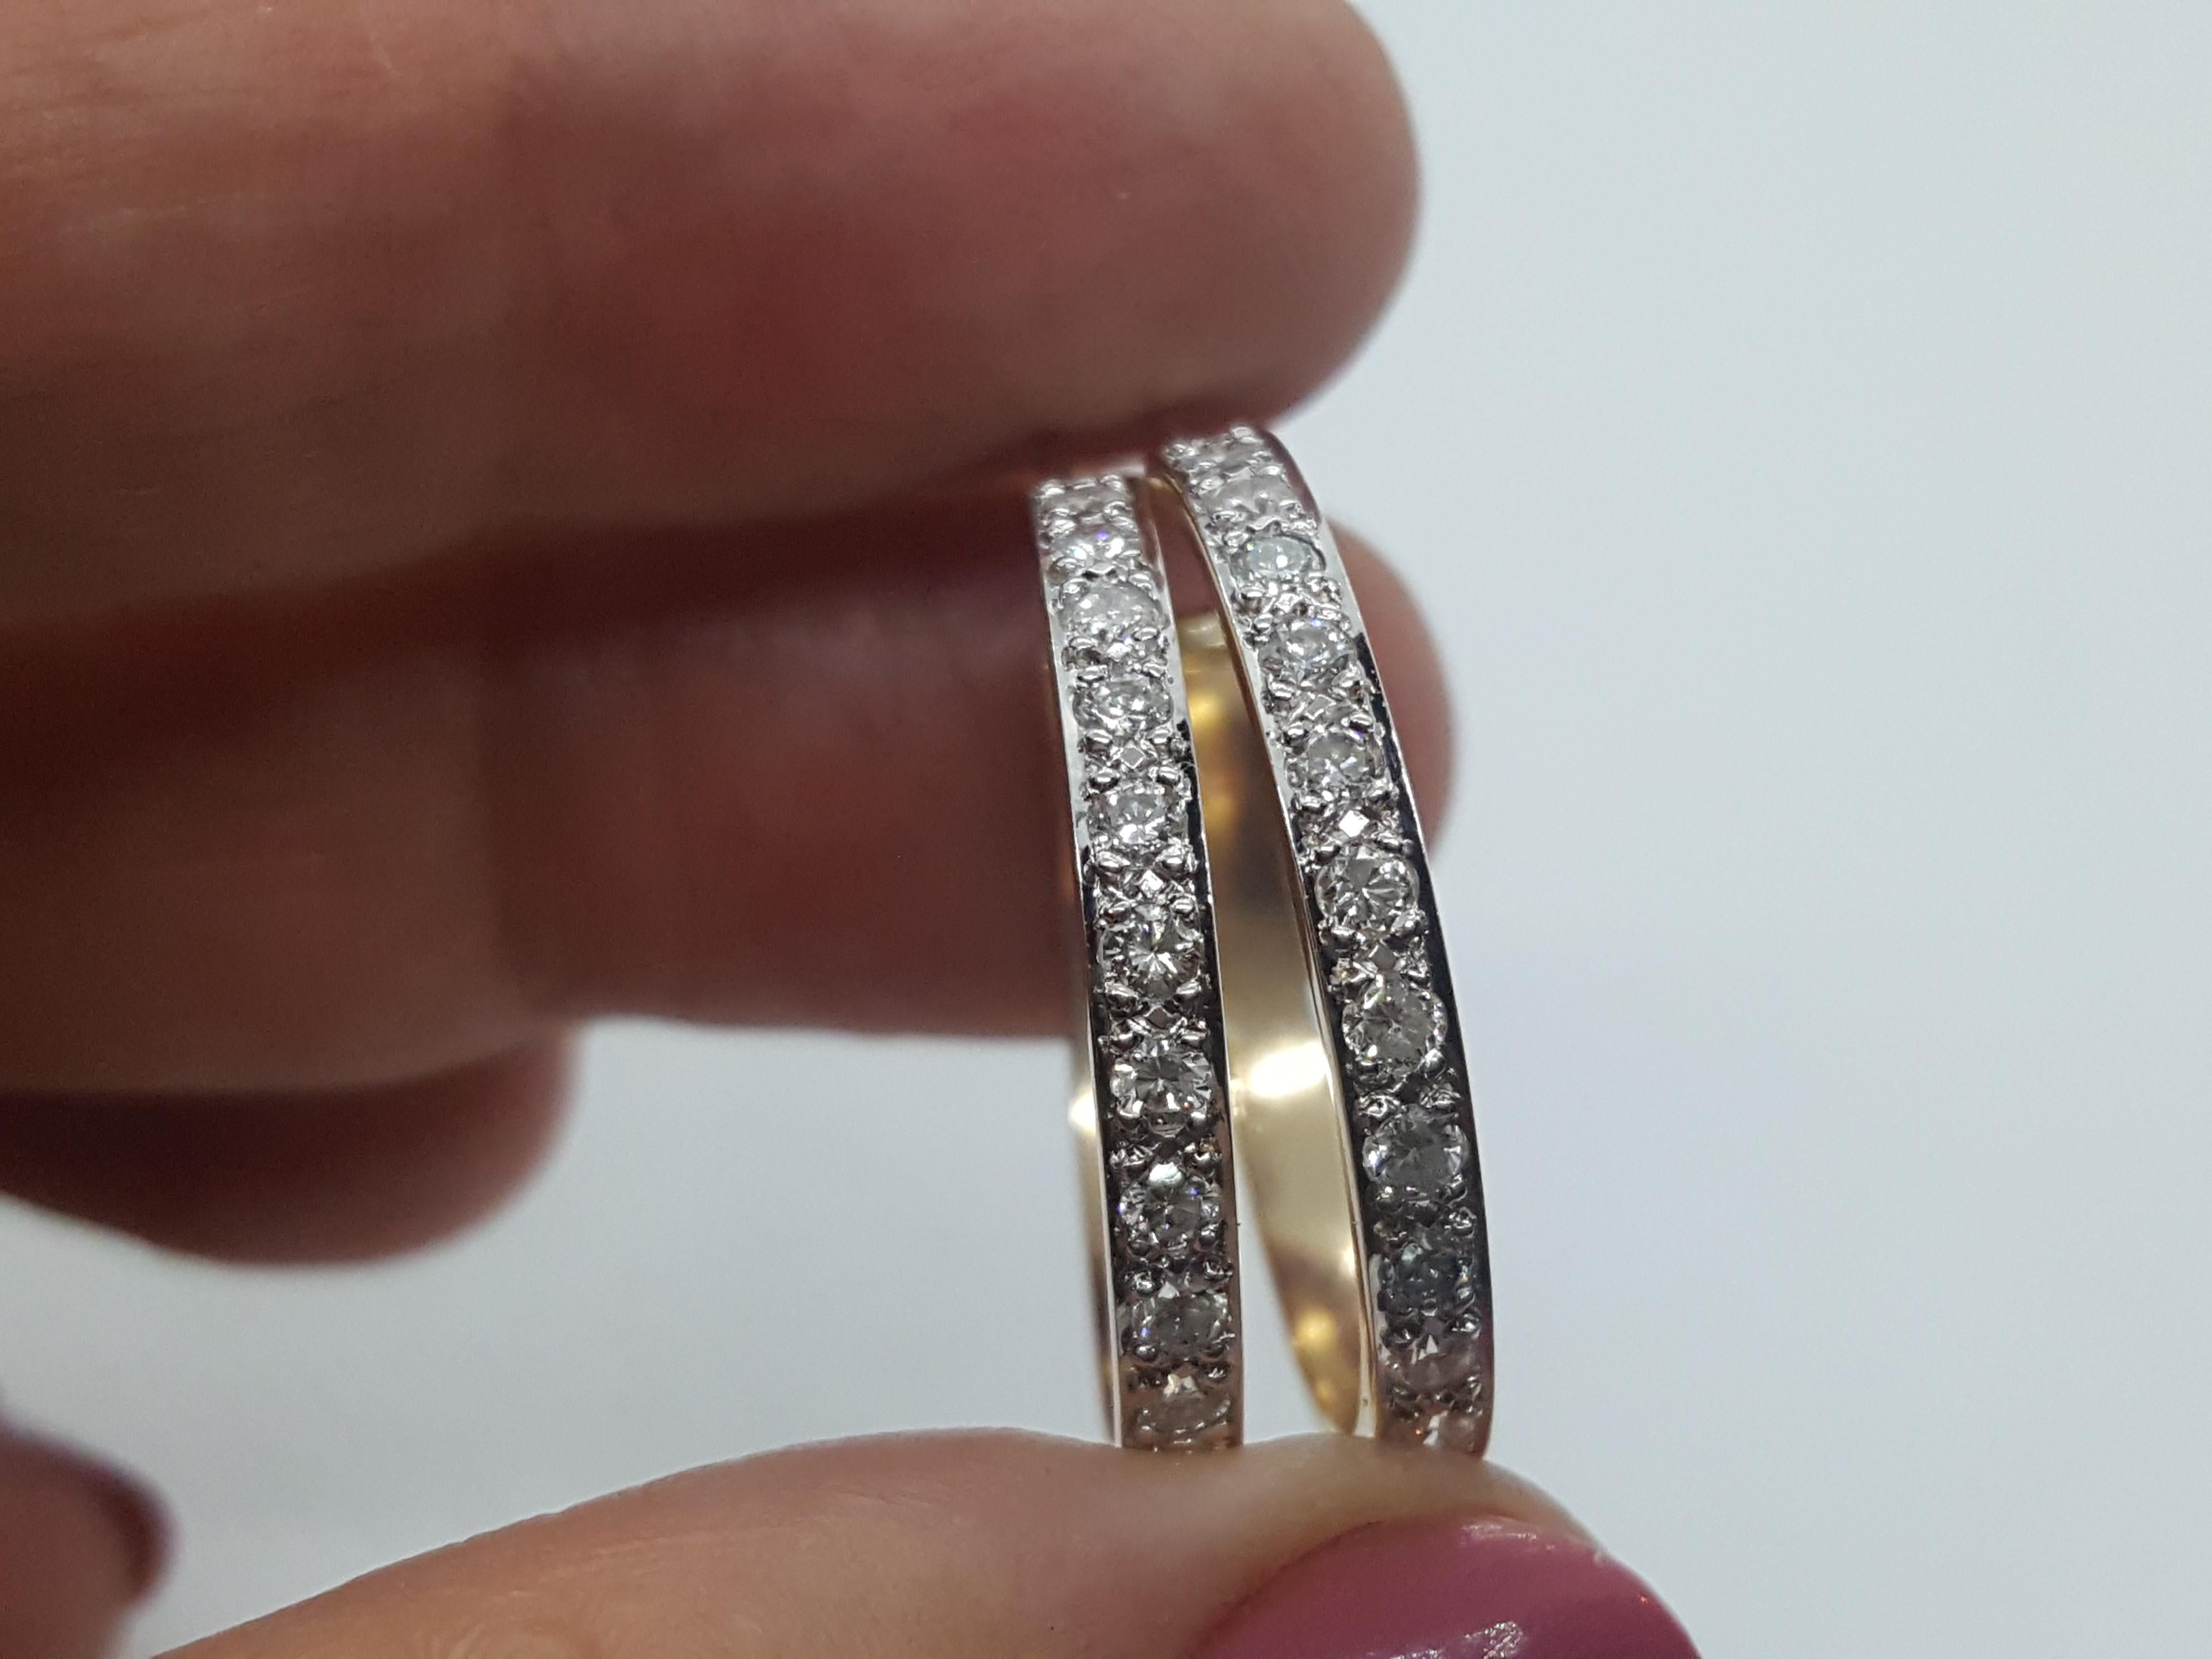 14kt Yellow Gold .30cttw Bead Set Diamond Hoop Earrings Friction Posts In Good Condition For Sale In Rancho Santa Fe, CA